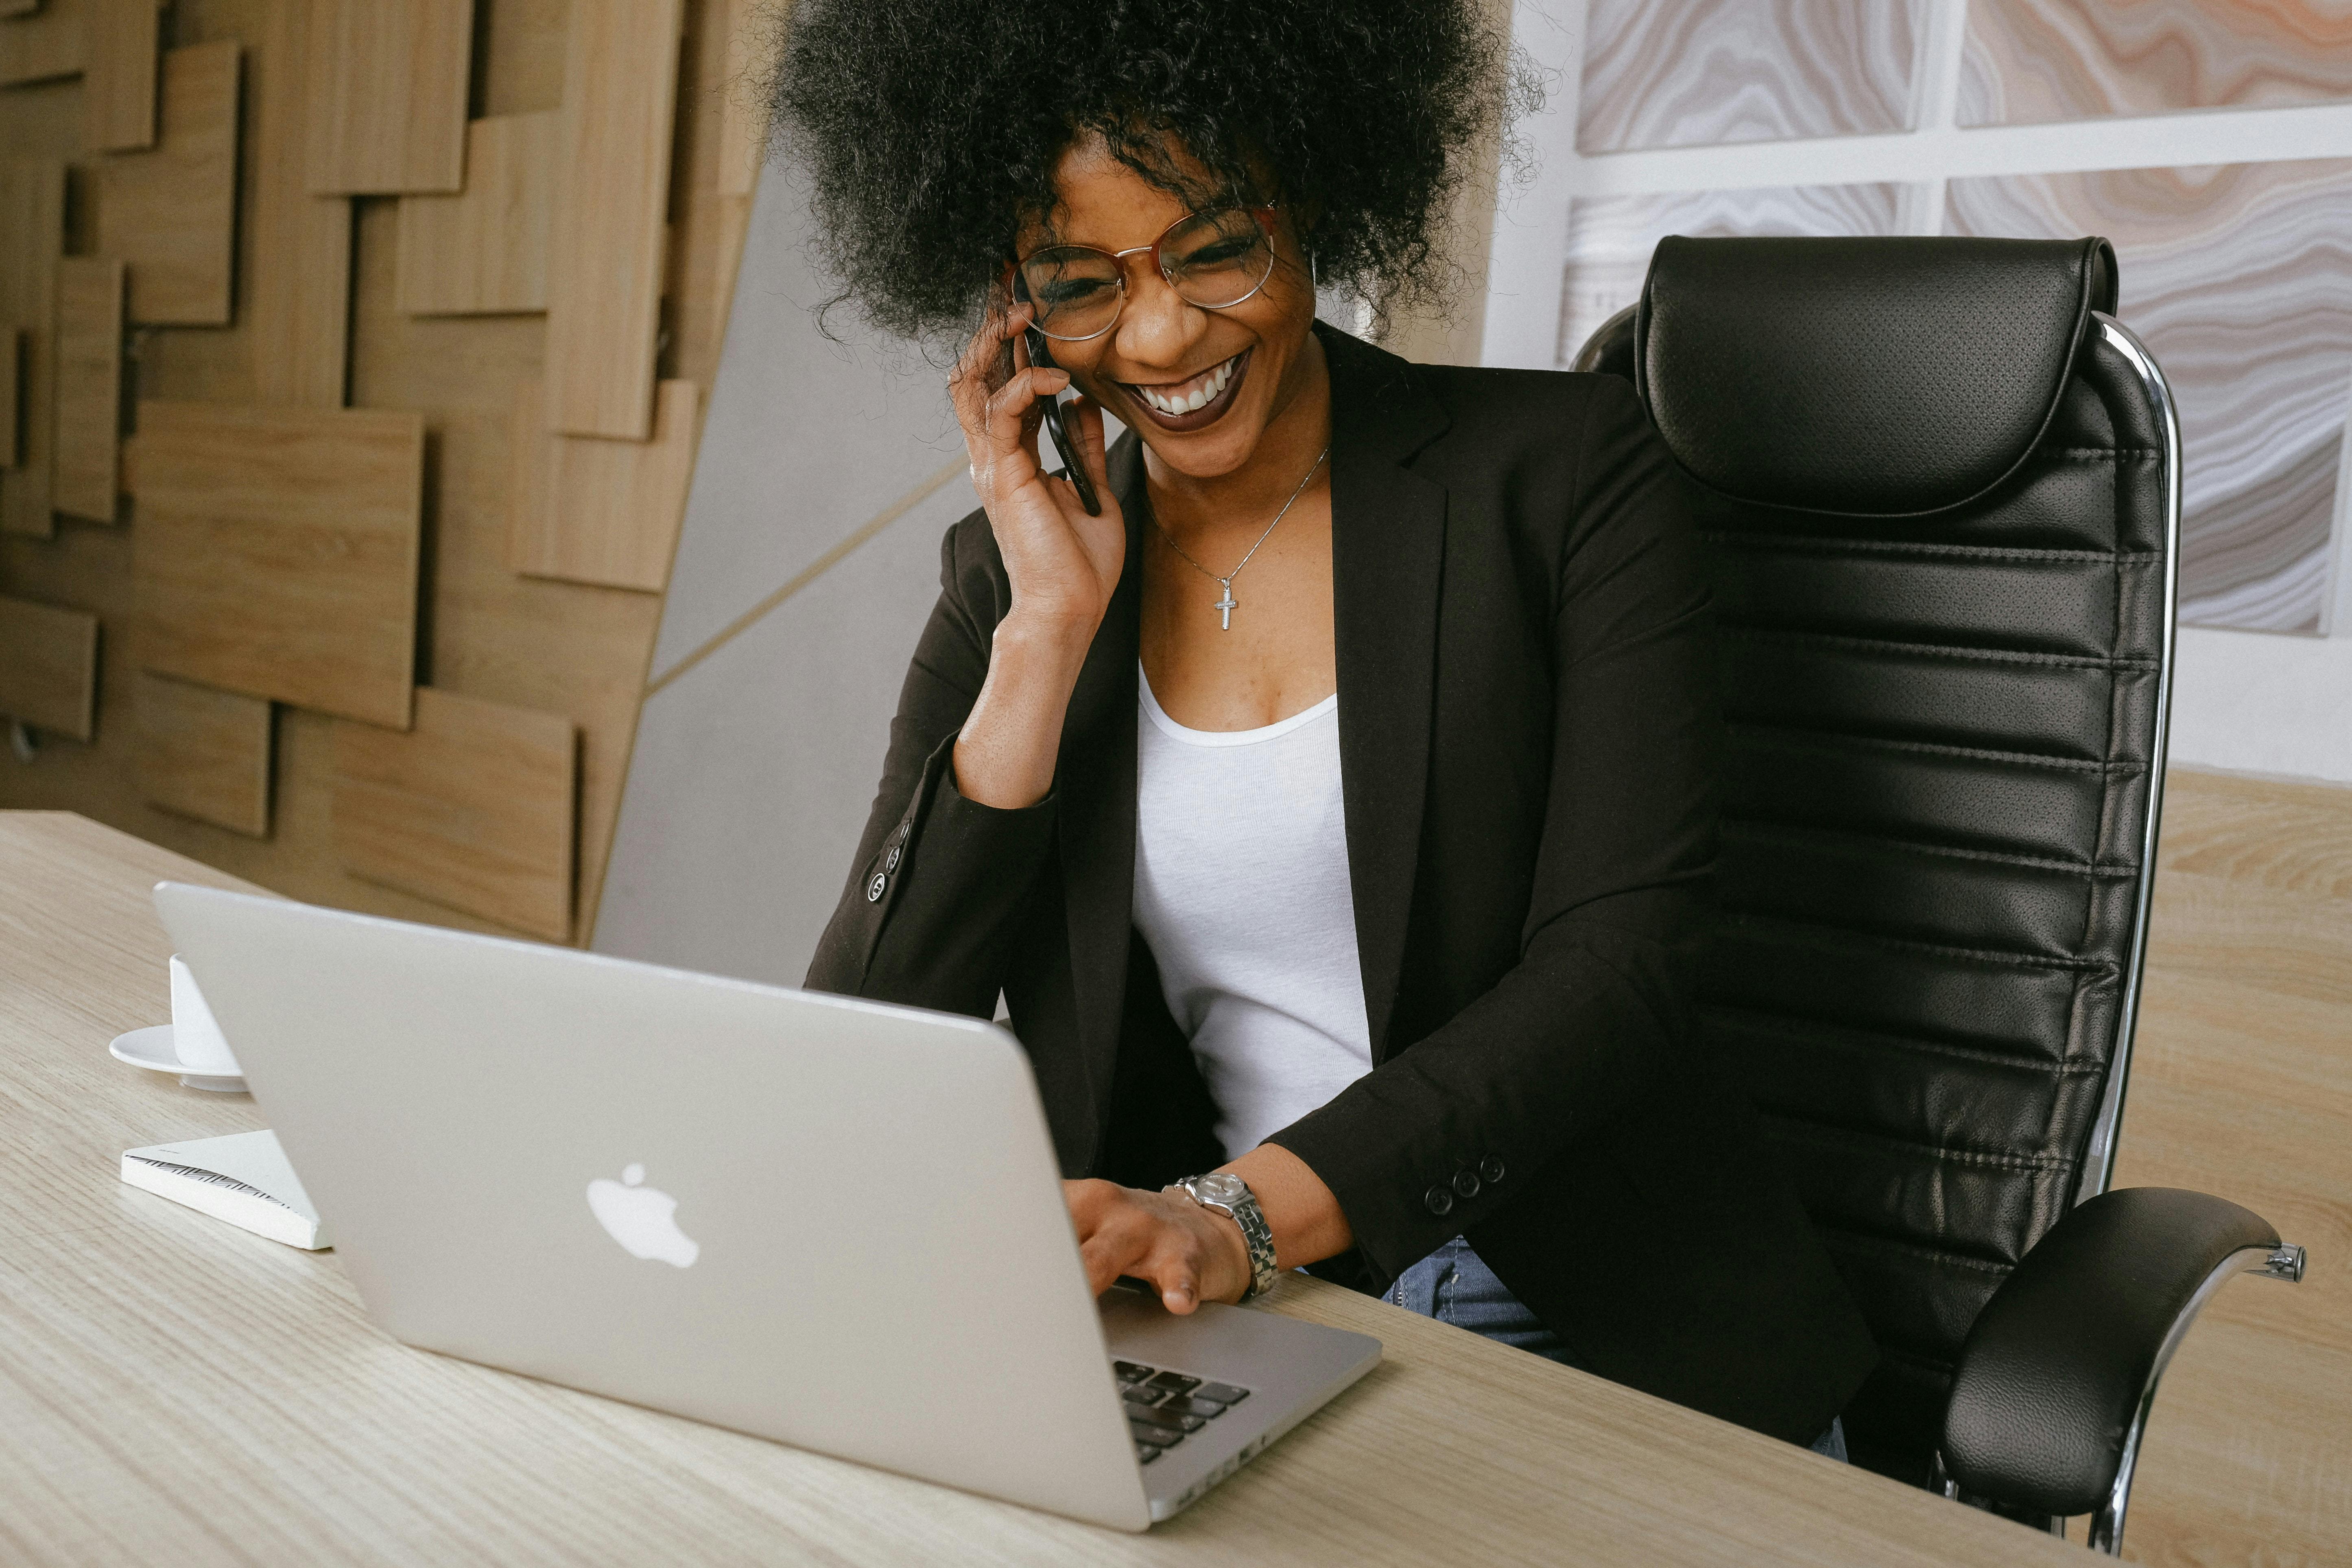 Woman entrepreneur smiling while using phone and laptop